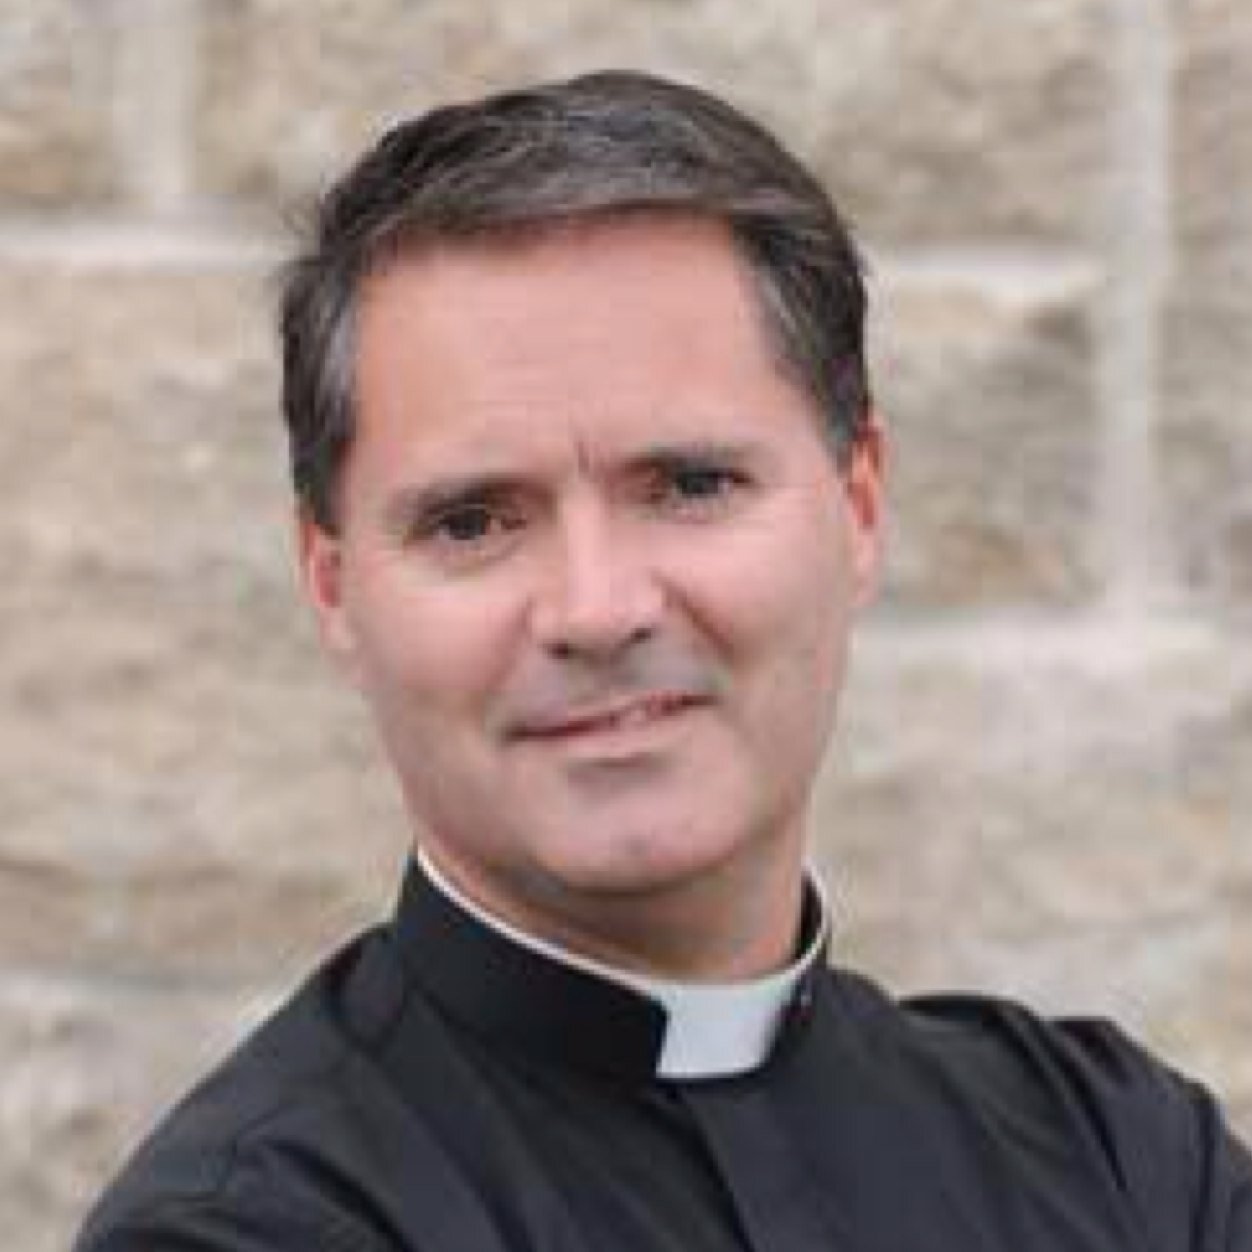 Catholic Priest. Pastor of @OLGDartmouth. Passionate about Church renewal and leadership. Author of Divine Renovation, from a maintenance to a missional parish.